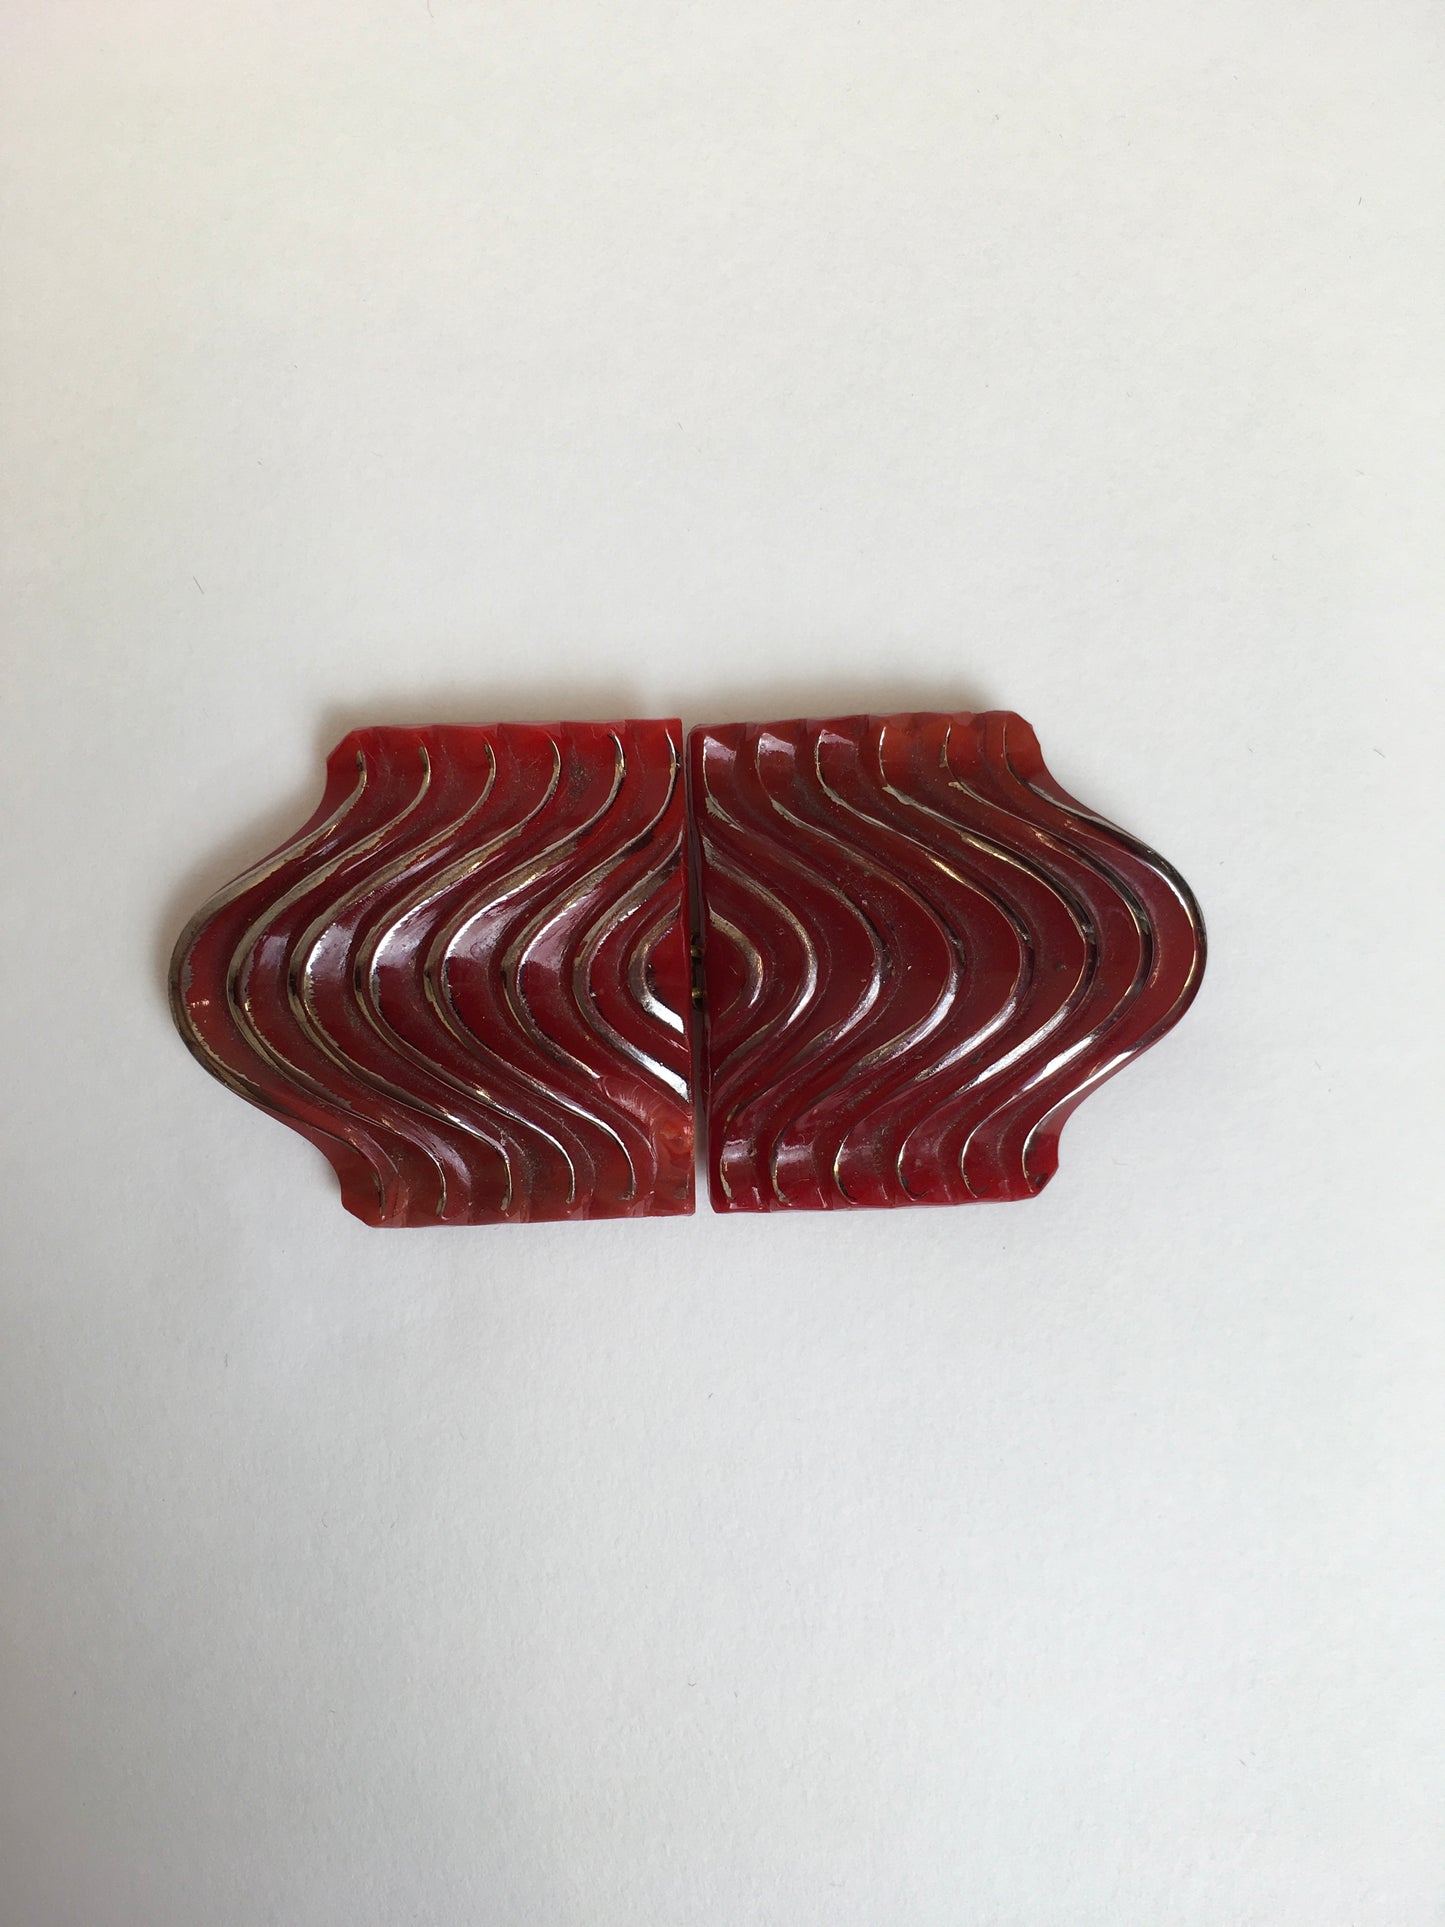 Original 1930’s Art Deco Red Glass Buckle - With Fabulous Detailing